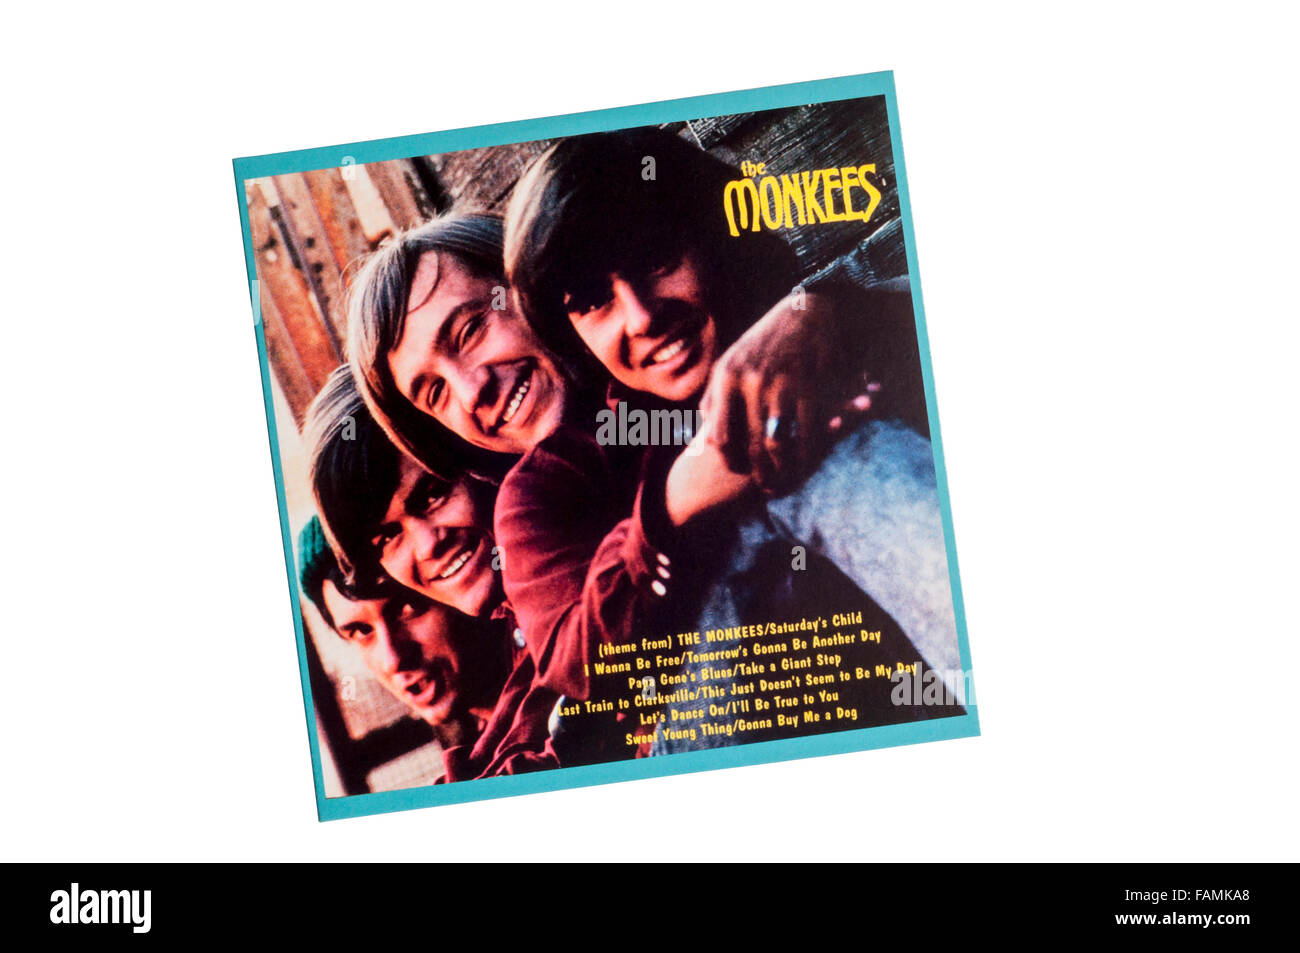 The Monkees was the eponymous first album by The Monkees band.  Released in 1966. Stock Photo